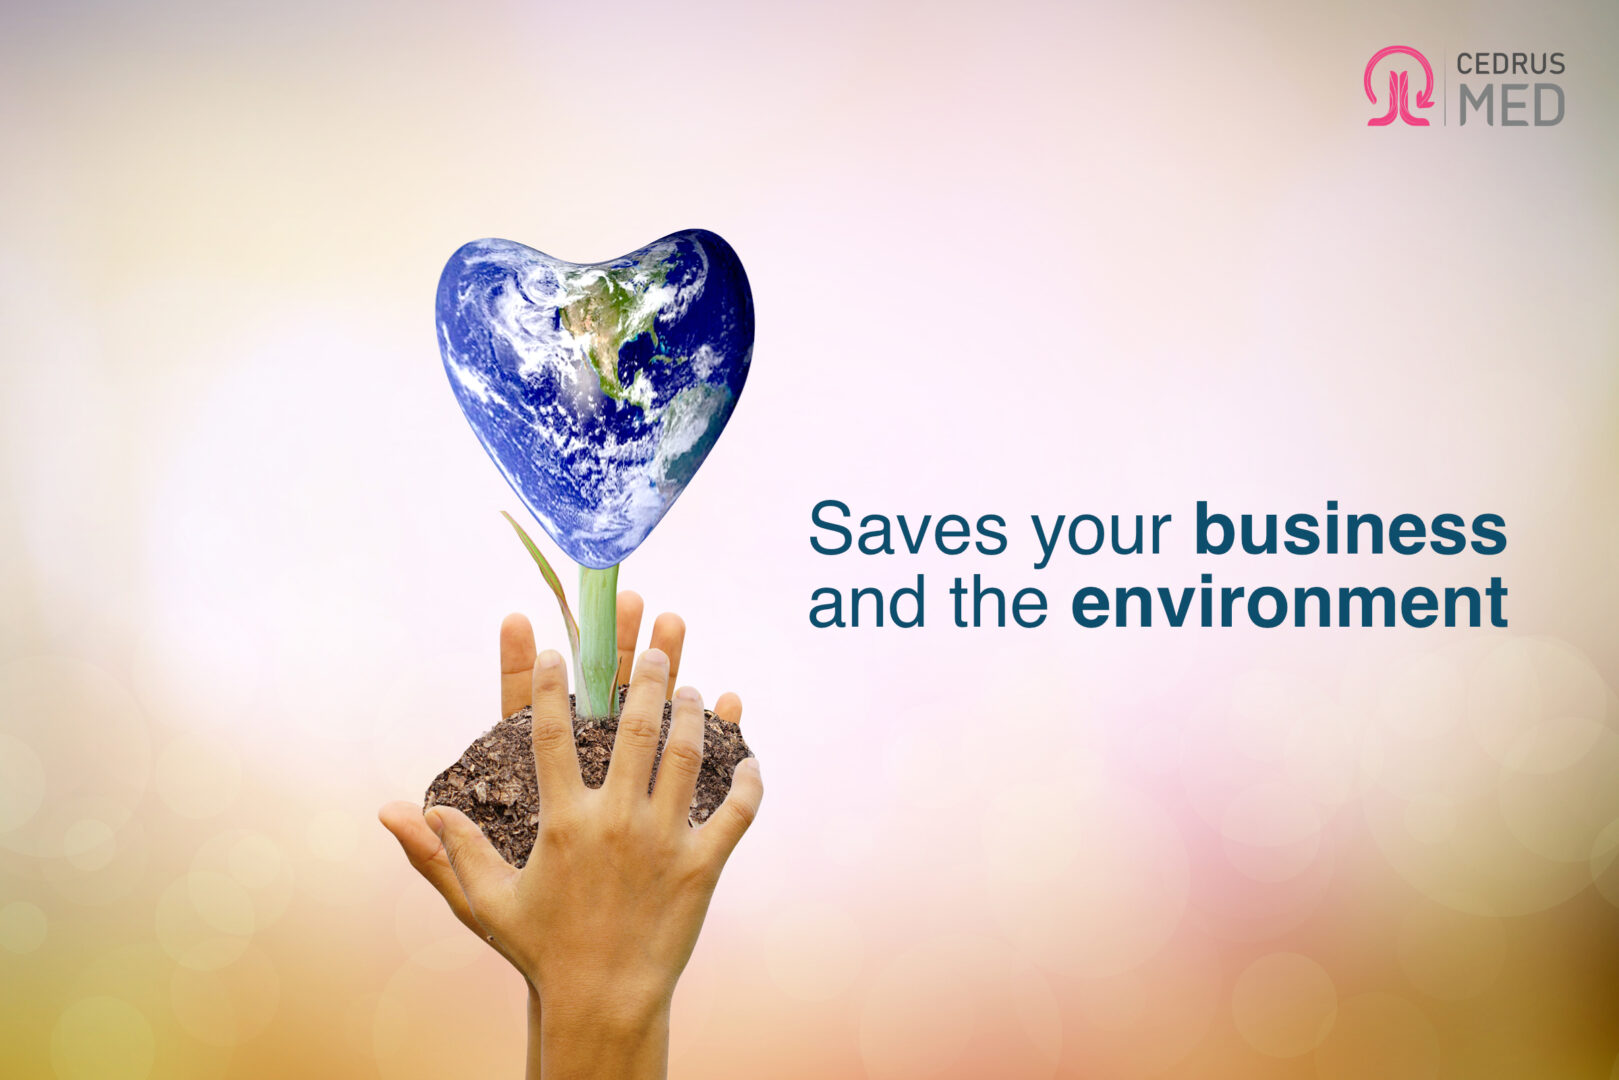 CedrusMed EHR Saves Your Business and the Environment.